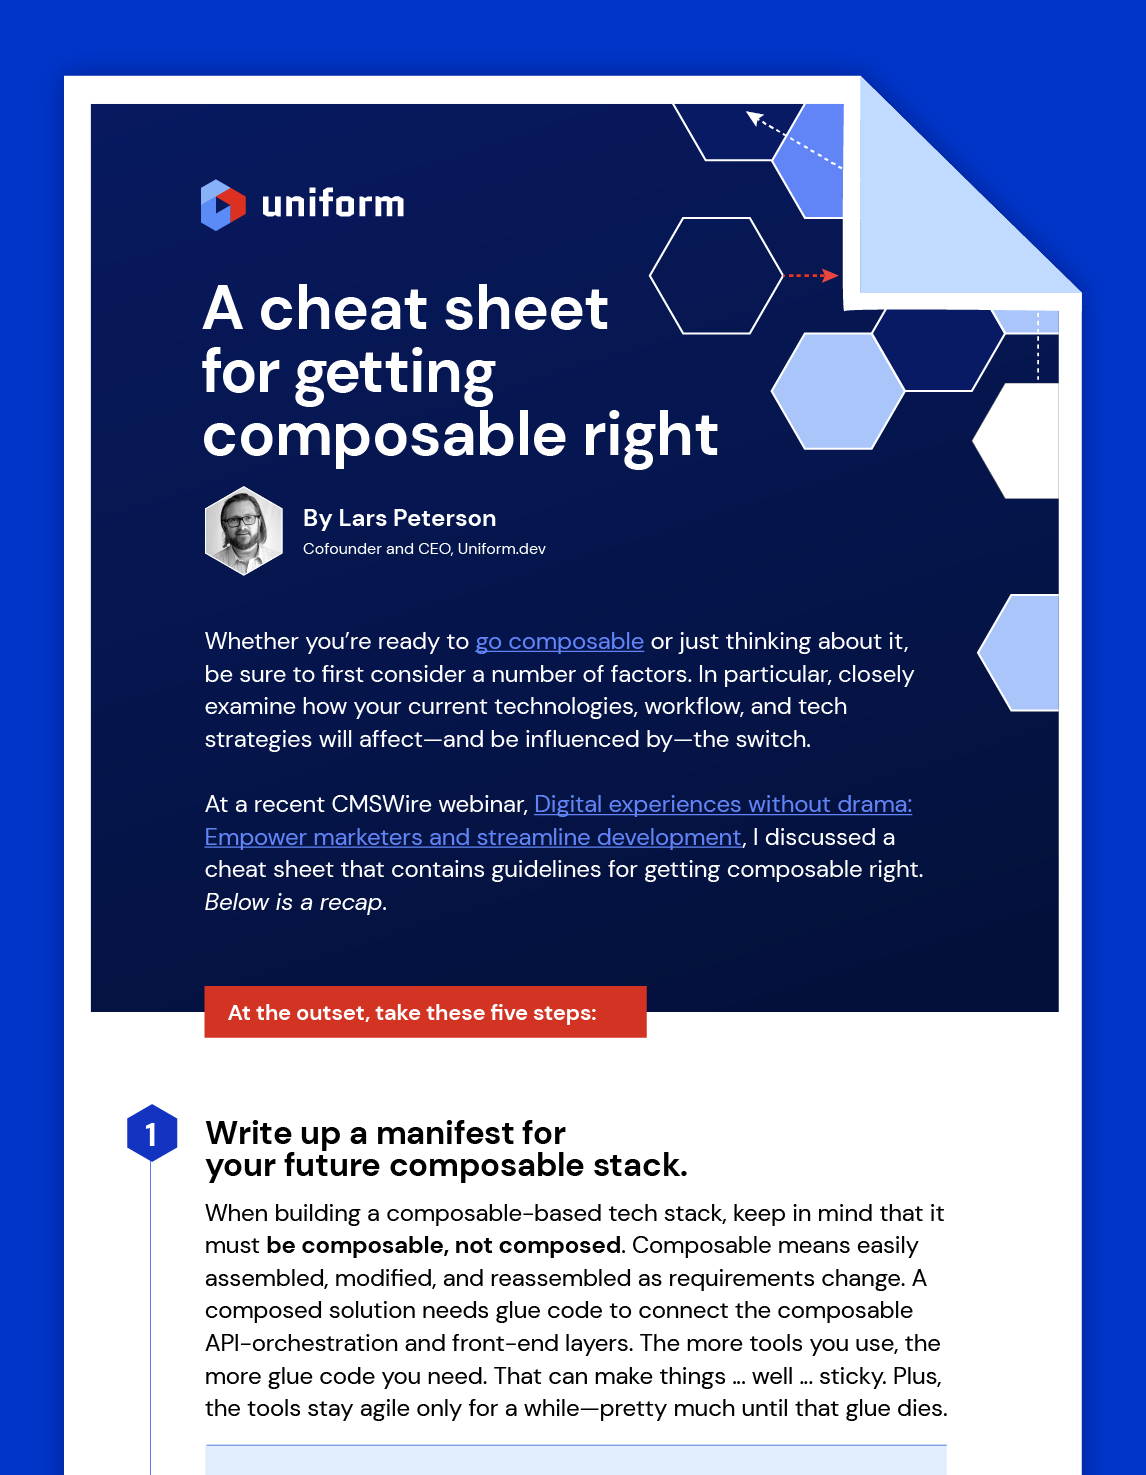 A cheat sheet for getting composable right!